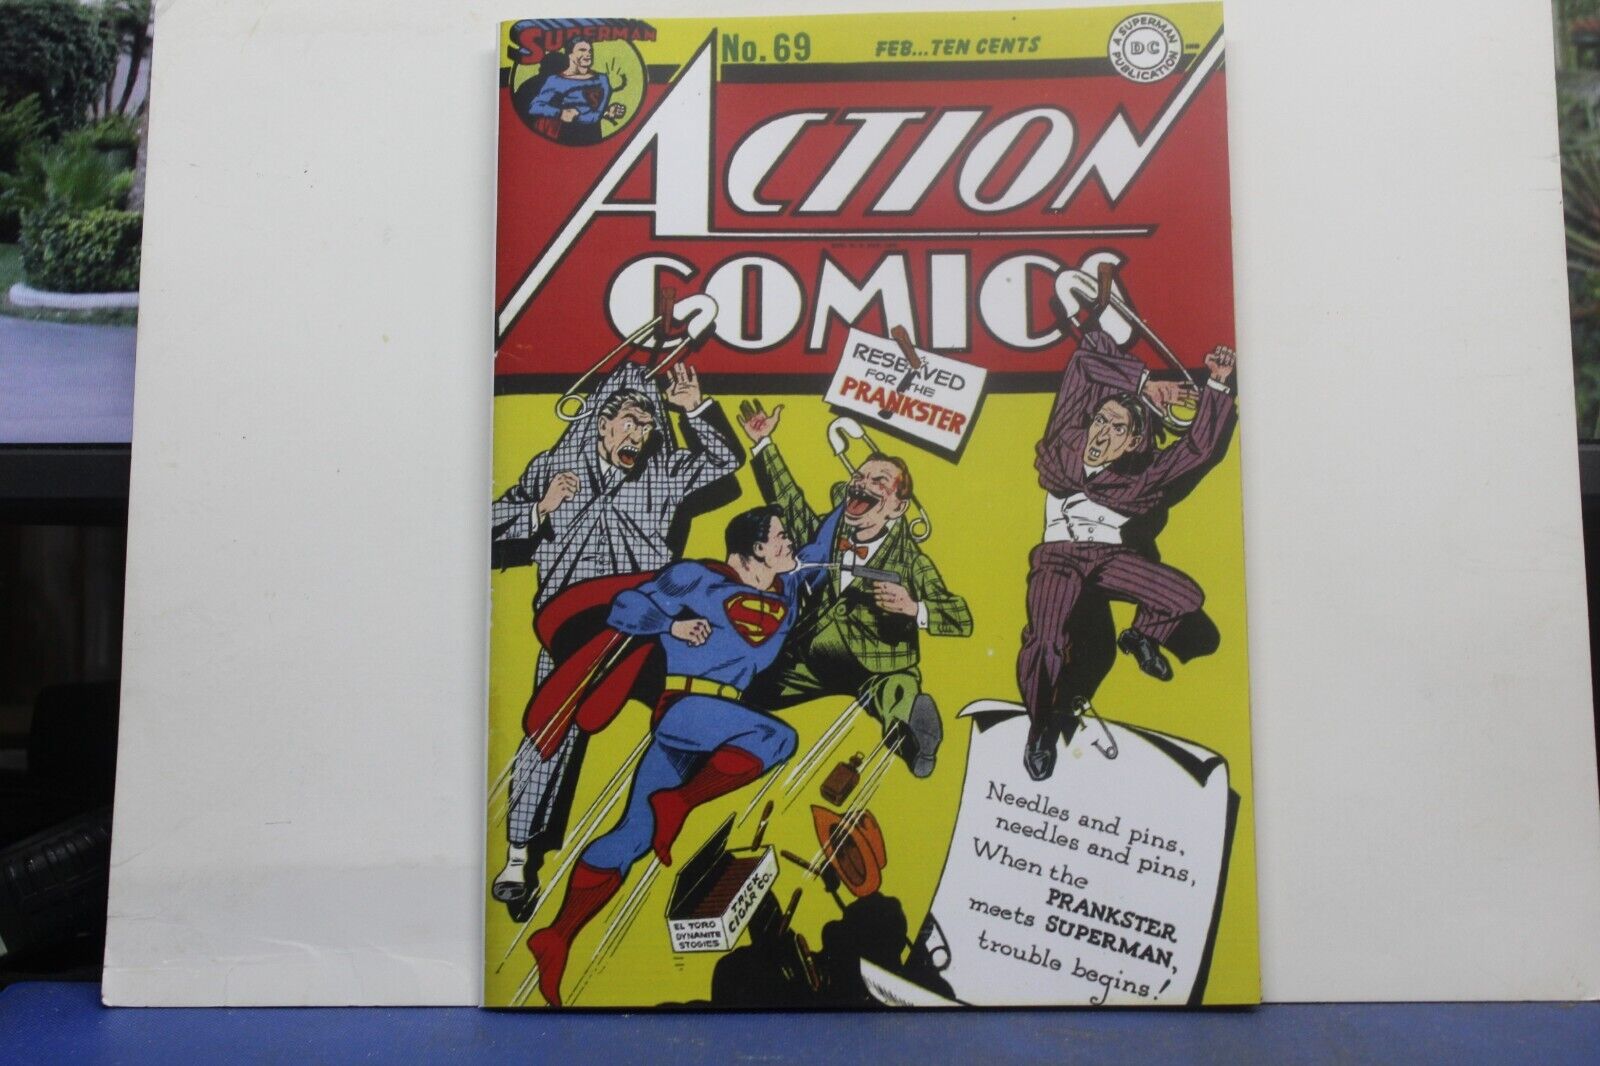 ACTION COMICS #69 REPRODUCTION COVER 1944